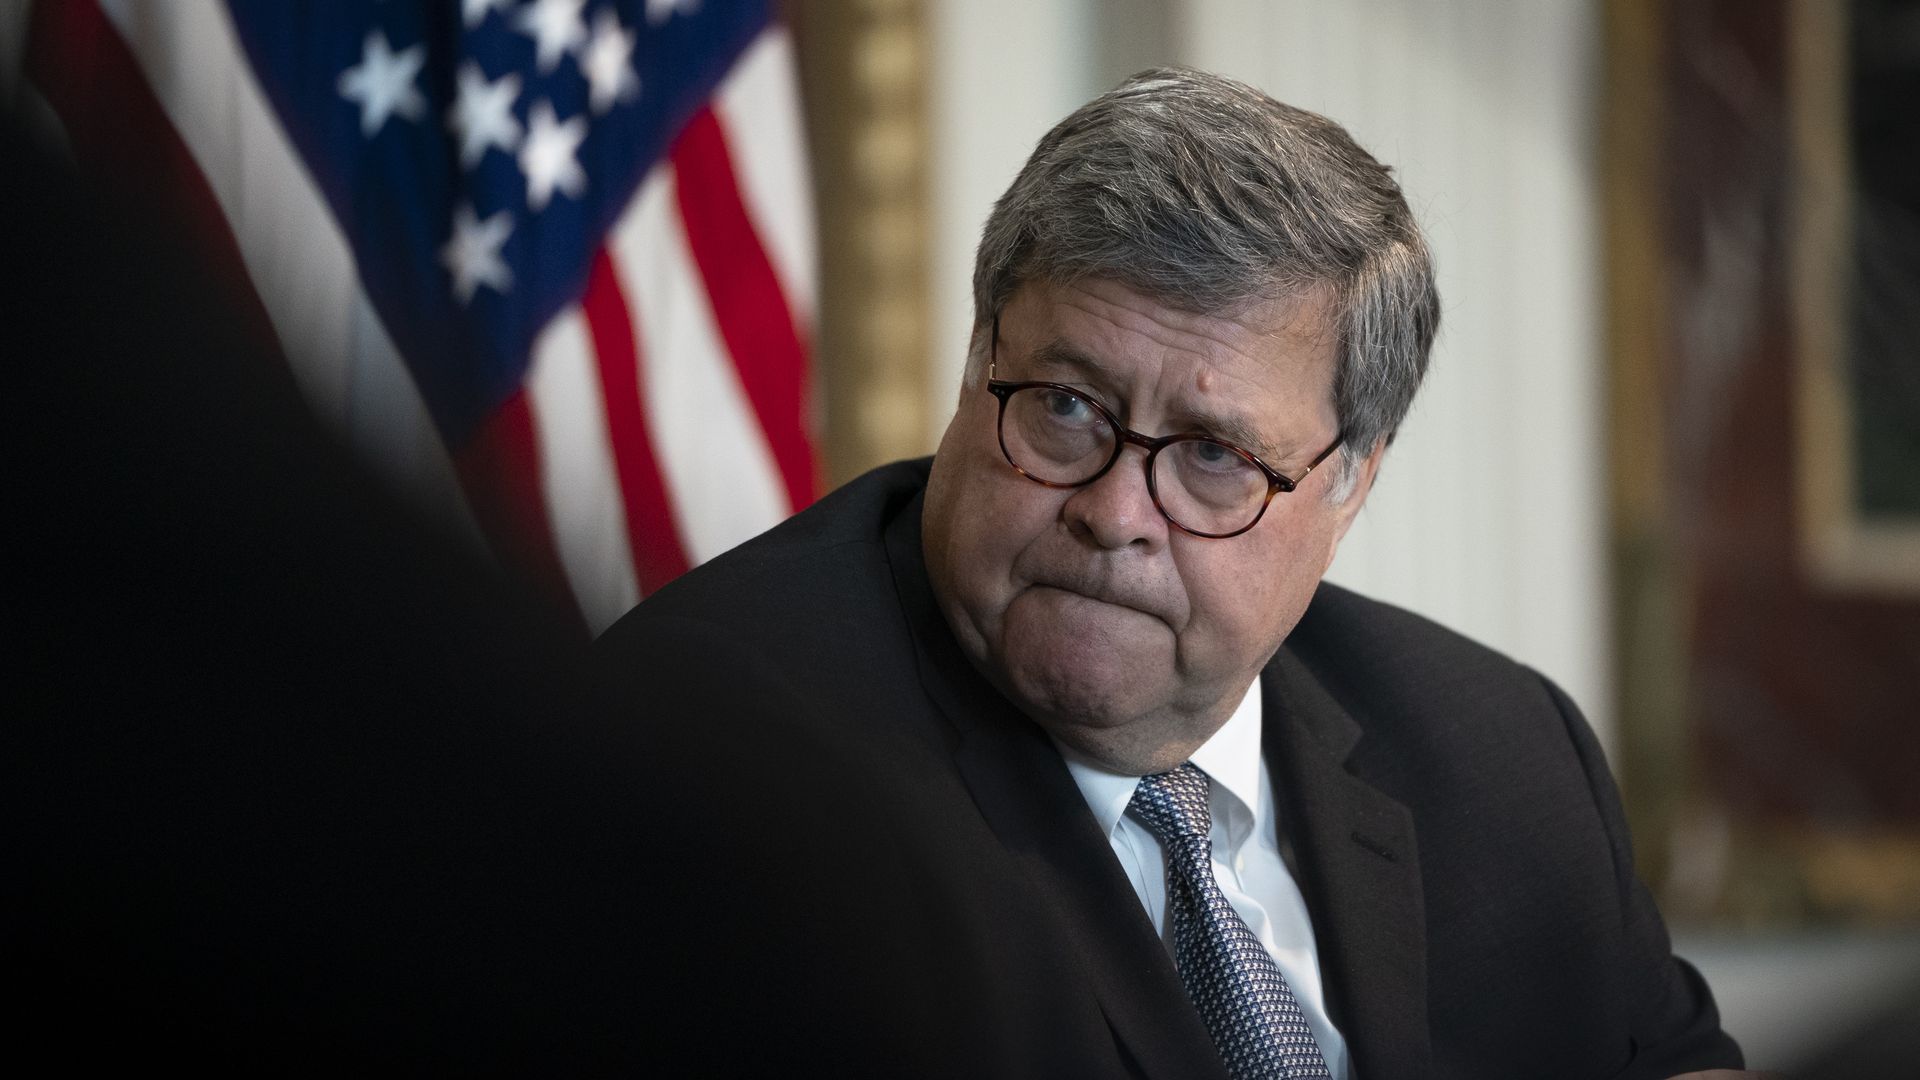 Attorney General William Barr during an event in the Indian Treaty Room of the Eisenhower Executive Office Building on August 4, 2020 in Washington, DC. 